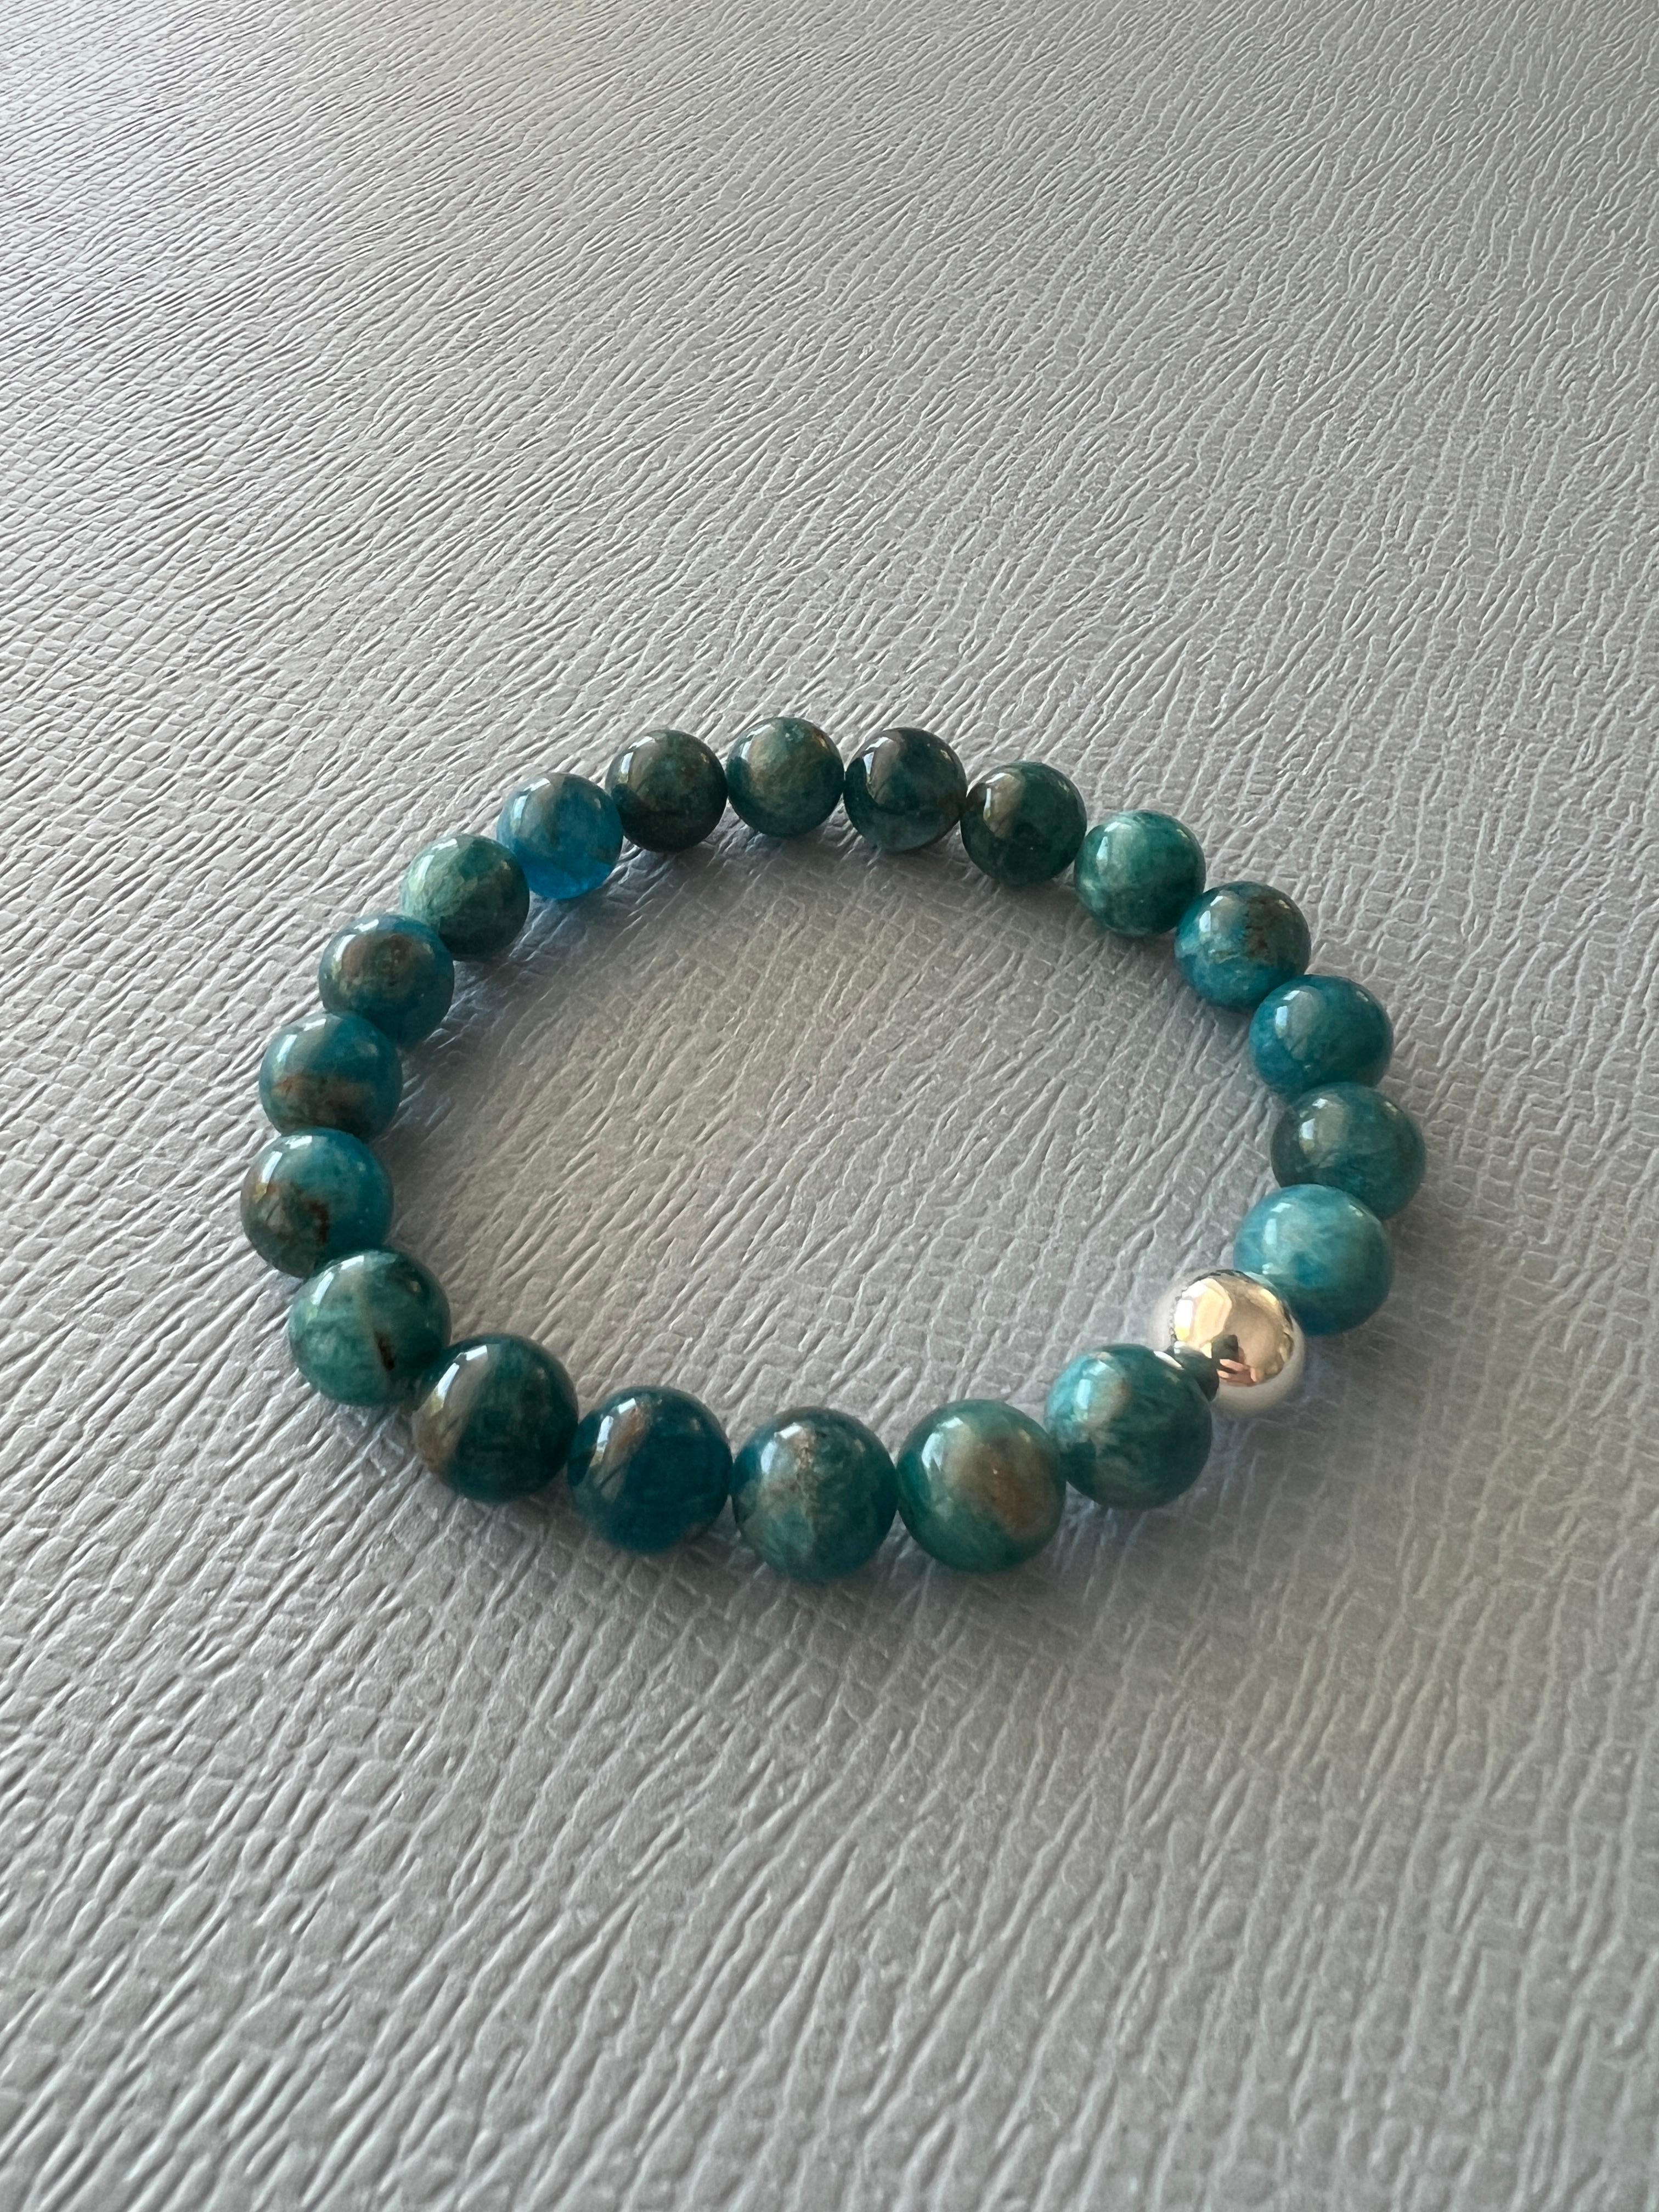 Blue Petroleum Apatite Round Bead Elastic Bracelet Silver Bead 

Made in Los Angeles

Designer: J Dauphin

The Natural Blue Apatite Round Bead Stackable Bracelet is an embodiment of geological history and metaphysical properties. Known for its deep,